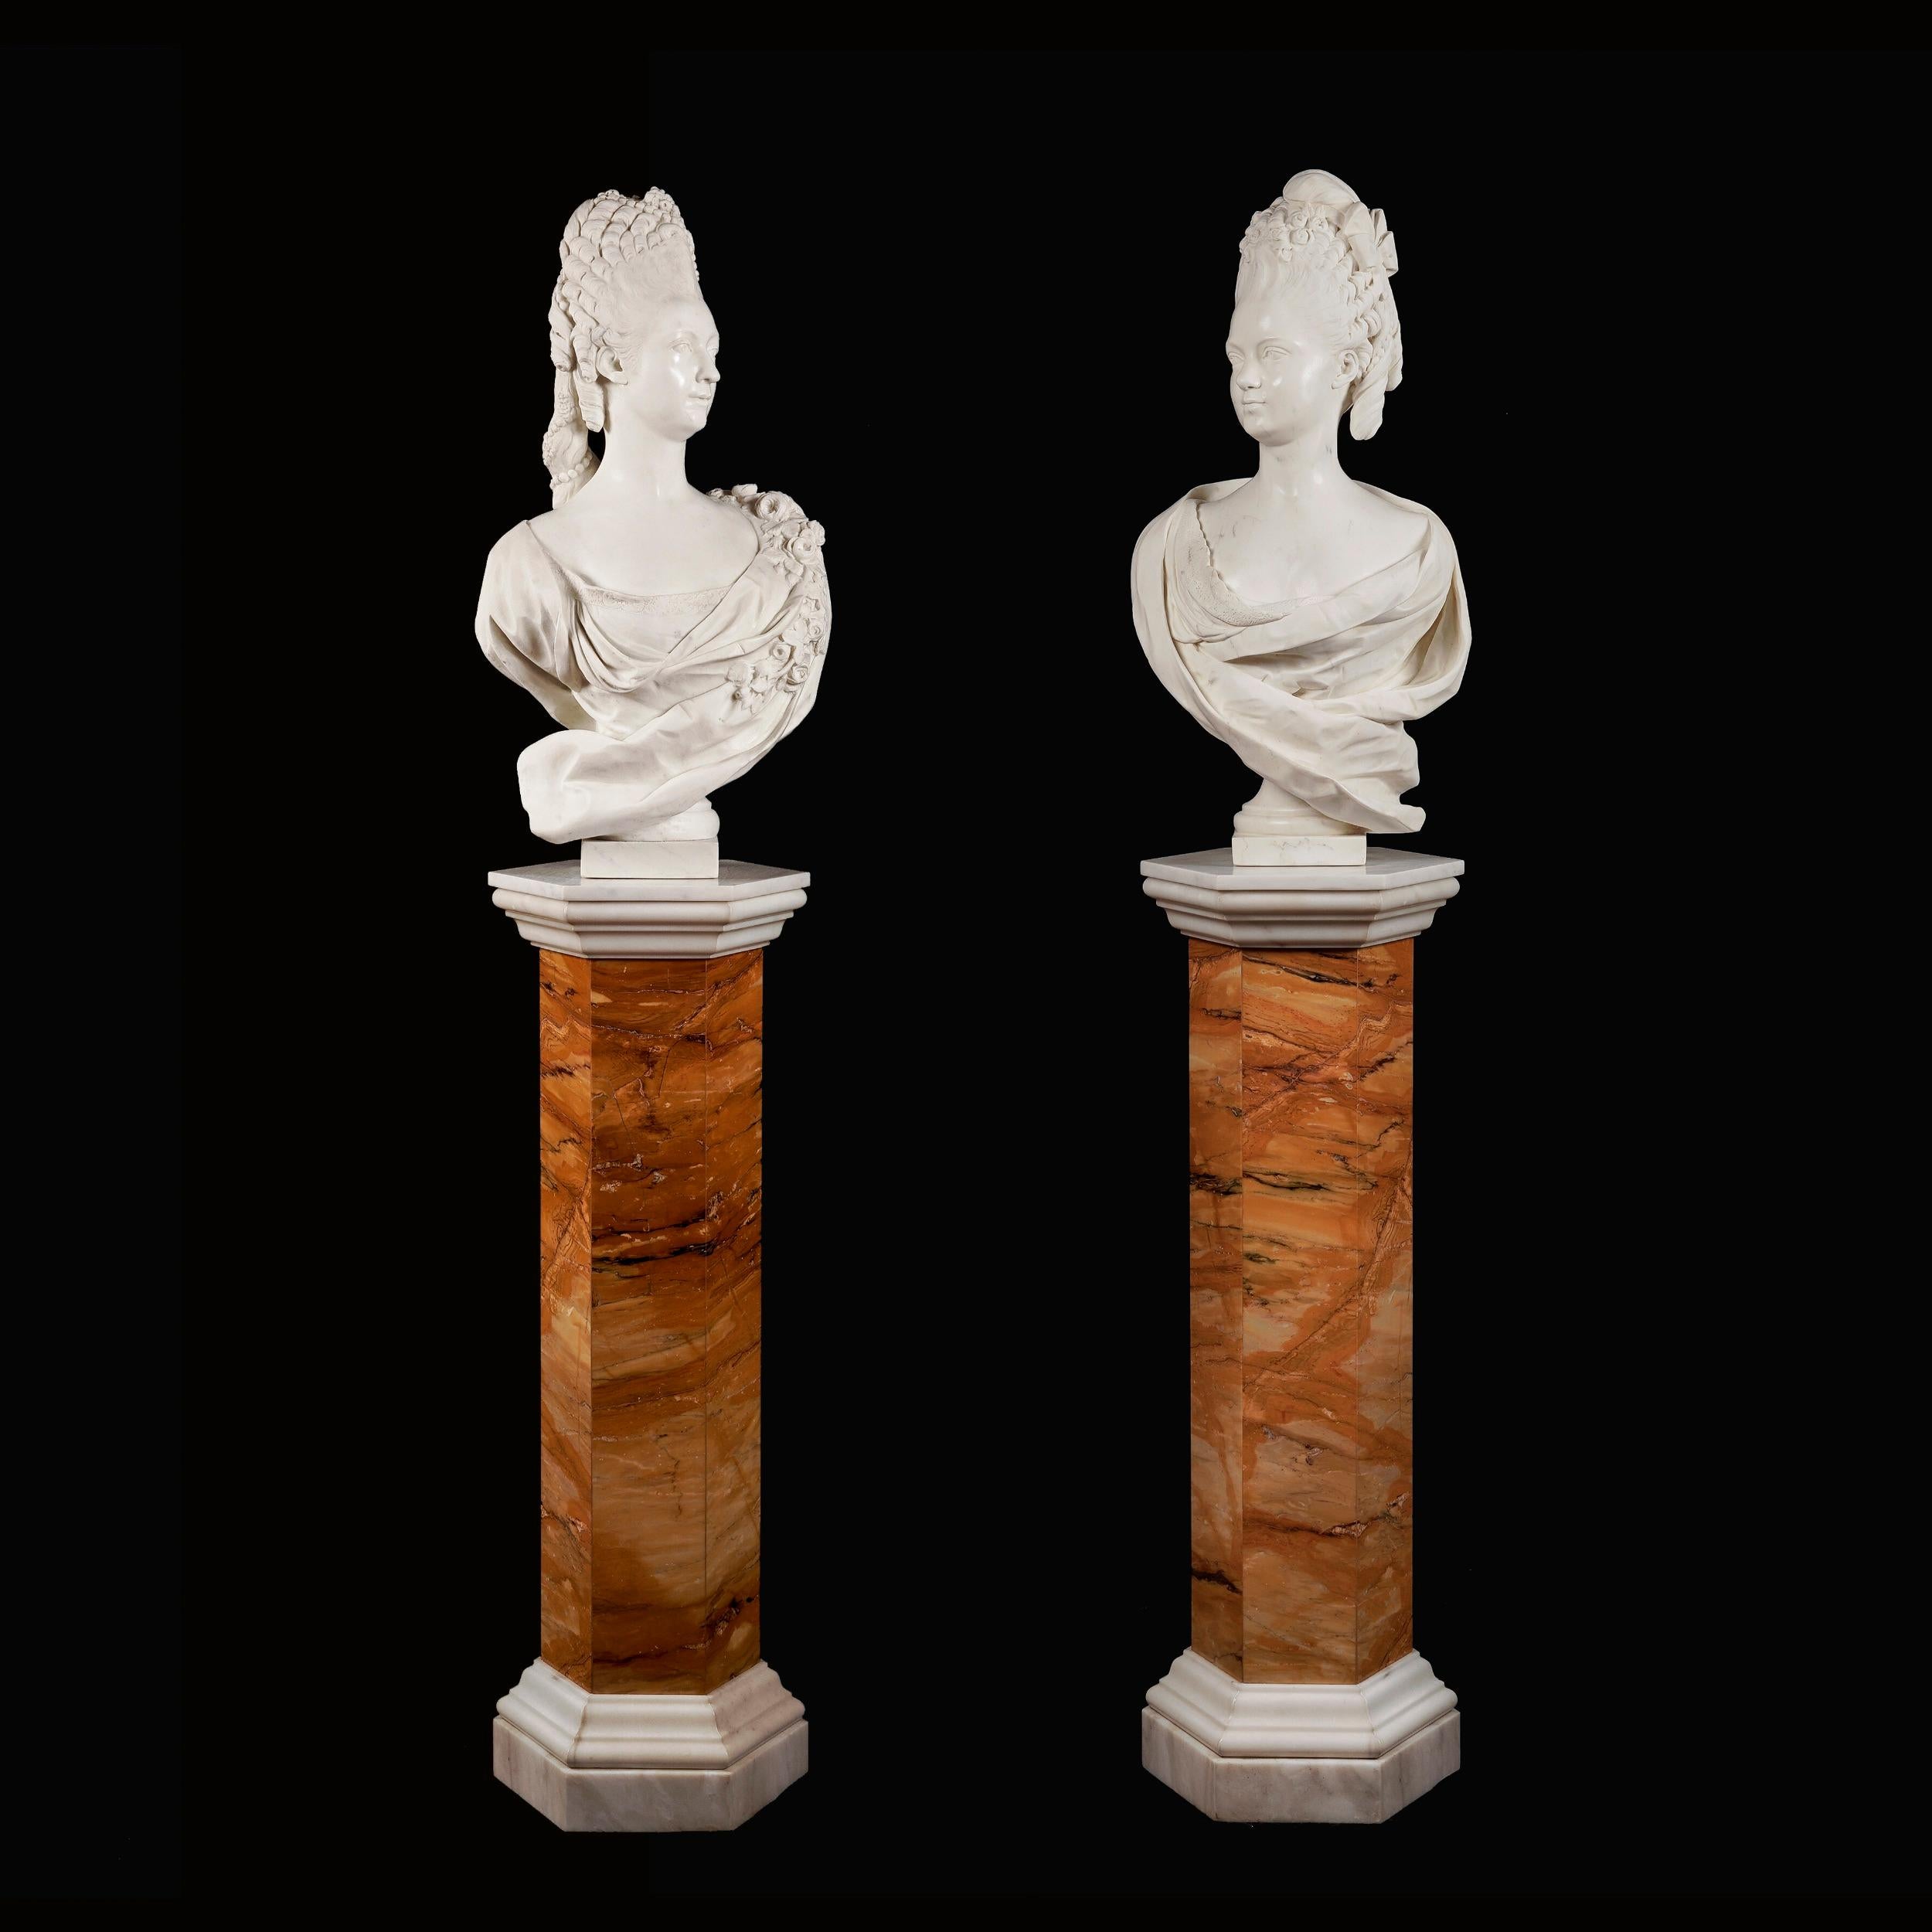 Pair of 19th Century Marble Busts of French Royal Figures on Marble Pedestals For Sale 5